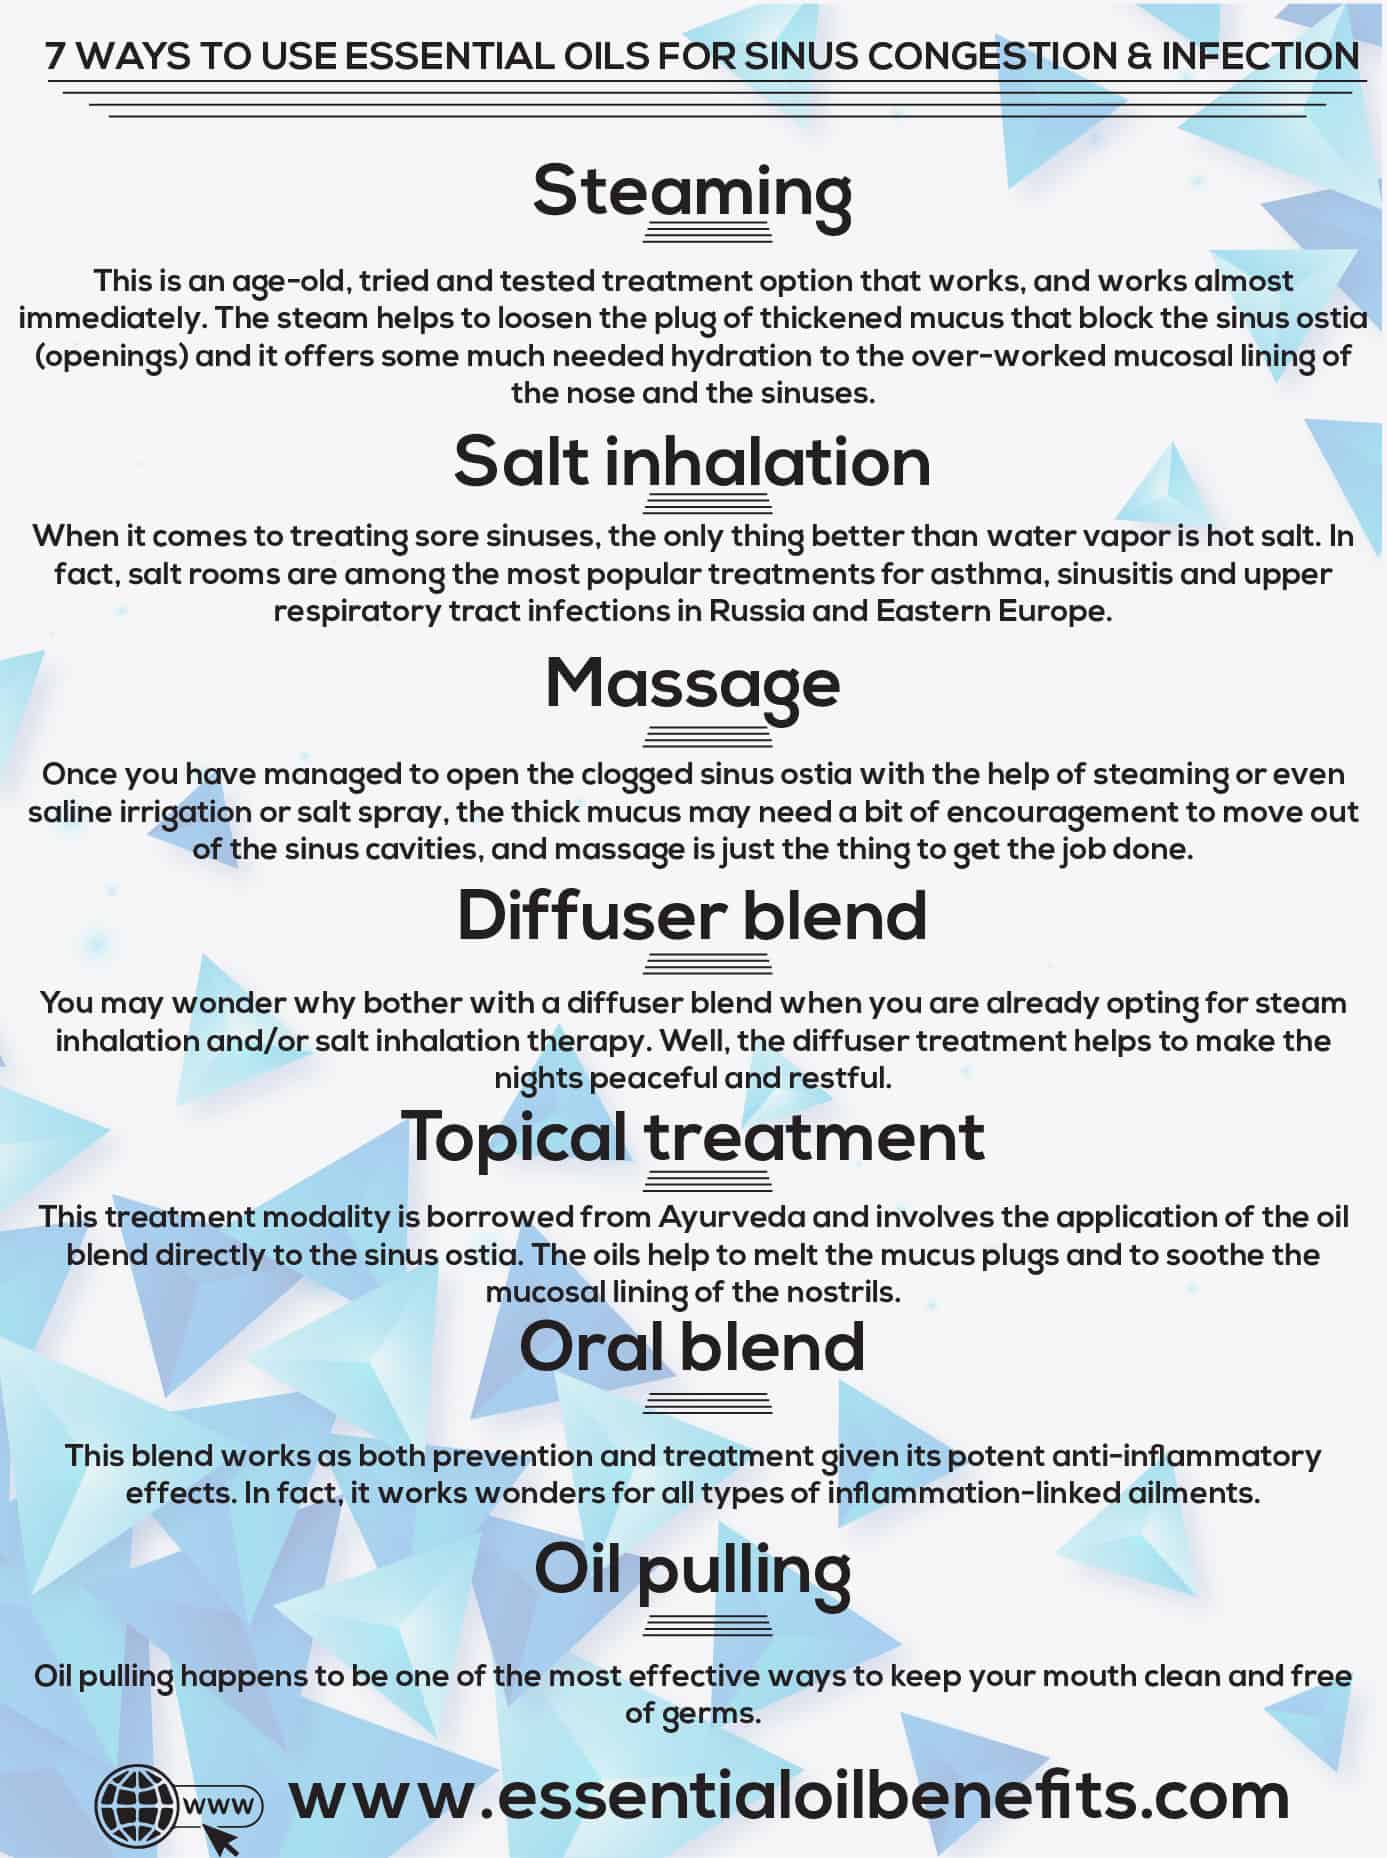 7 Ways You Can Use Essential Oils For Relief In Sinus Congestion, Headaches And Infections Essential Oil Benefits